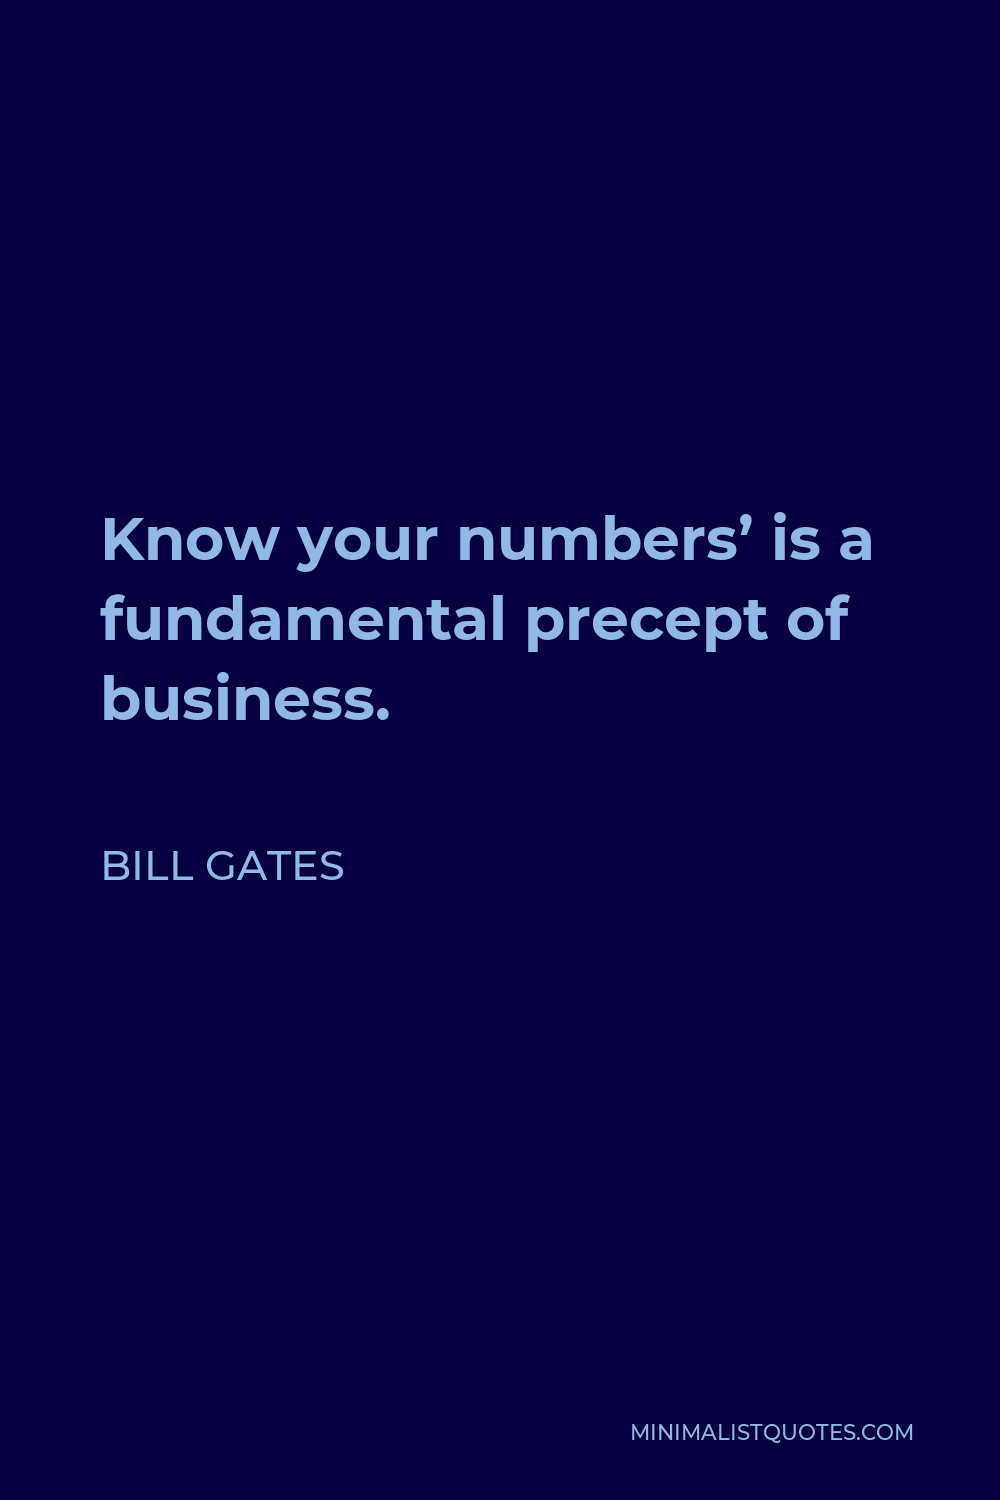 Bill Gates Quote - Know your numbers’ is a fundamental precept of business.